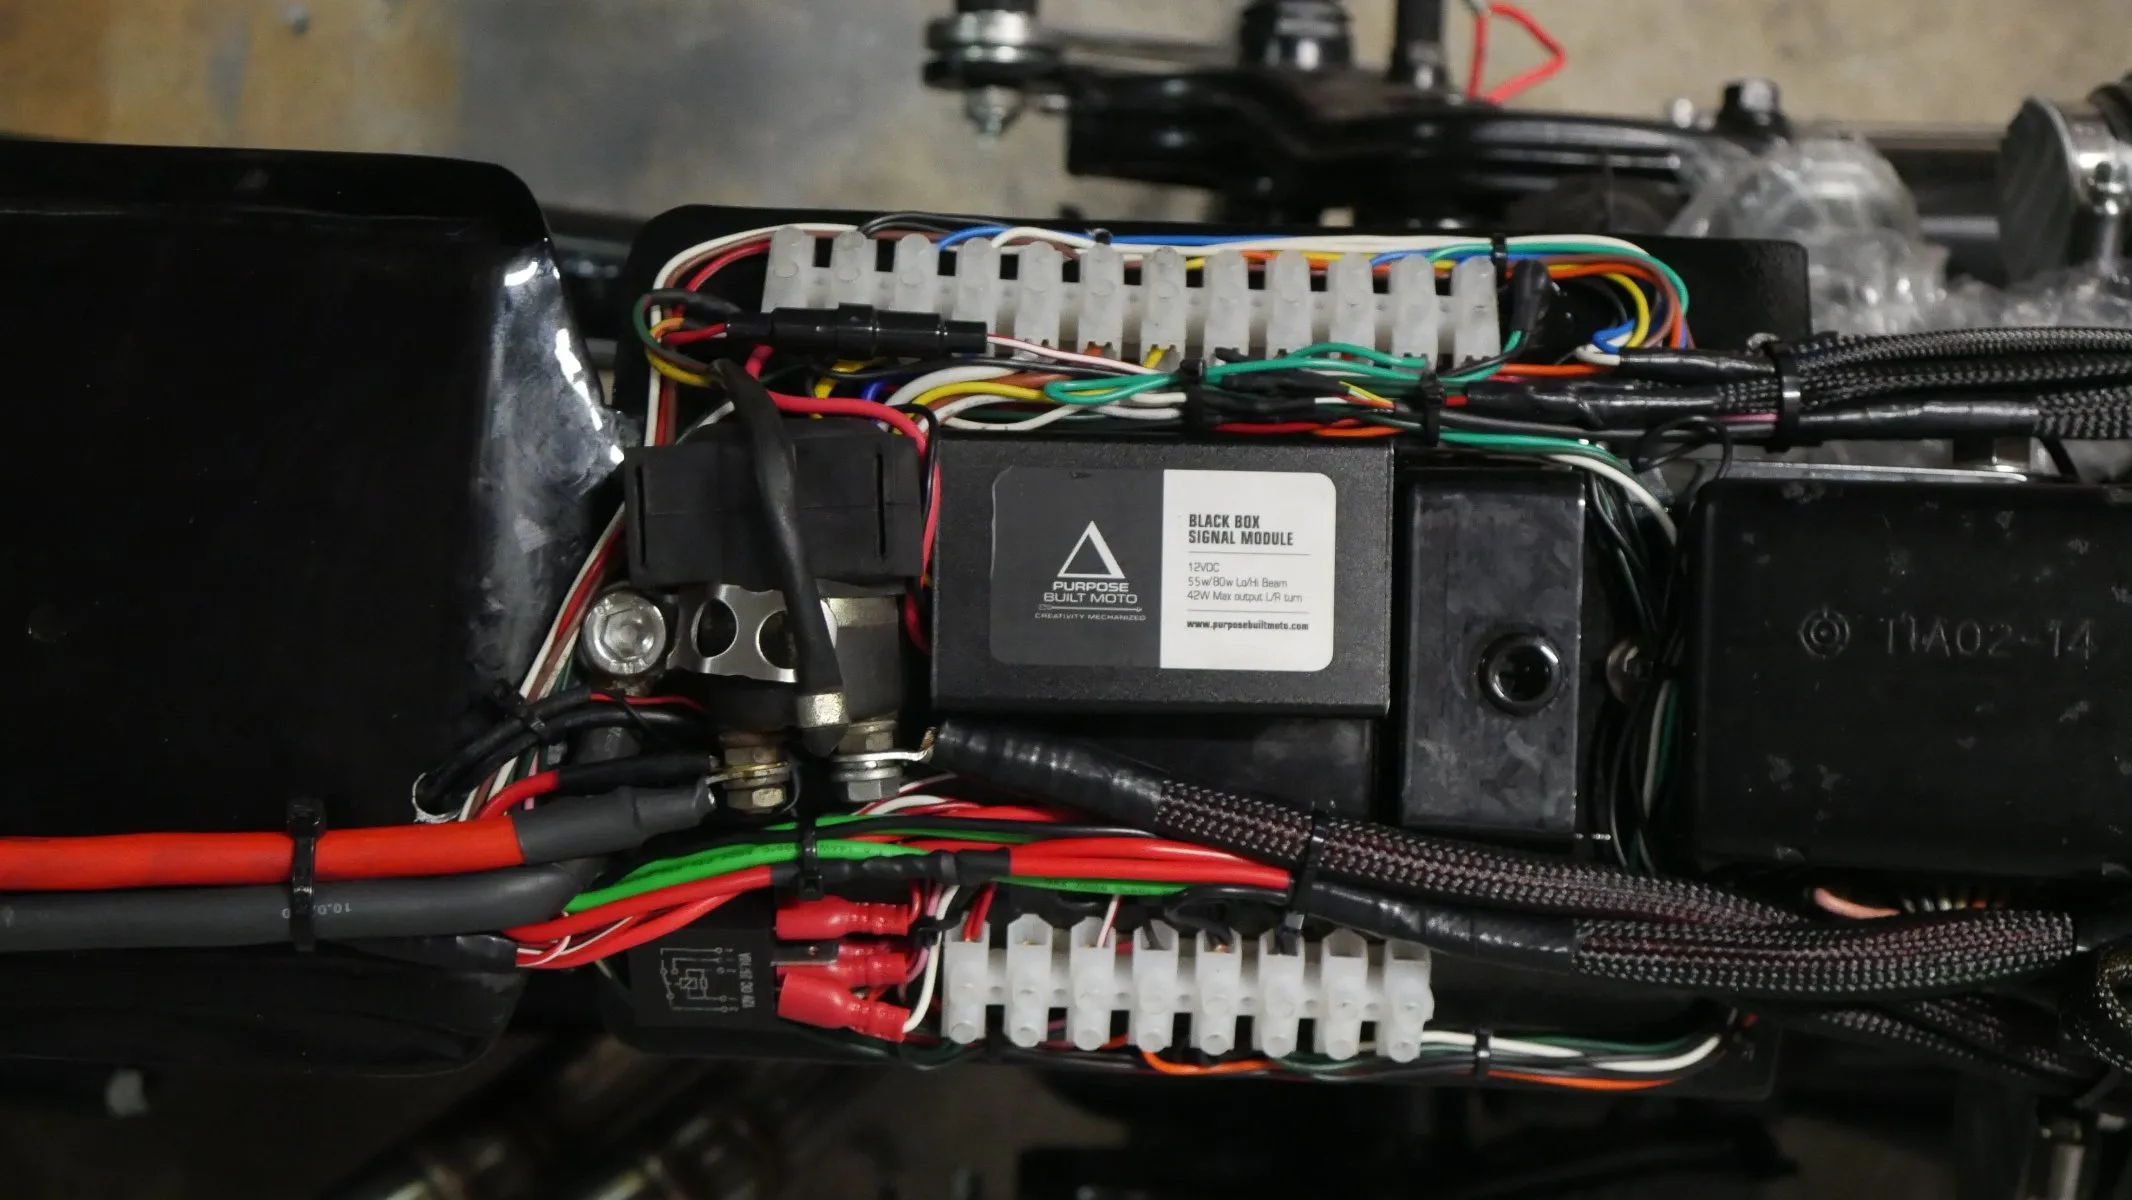 Top 5 wiring mistakes to avoid on your Cafe Racer